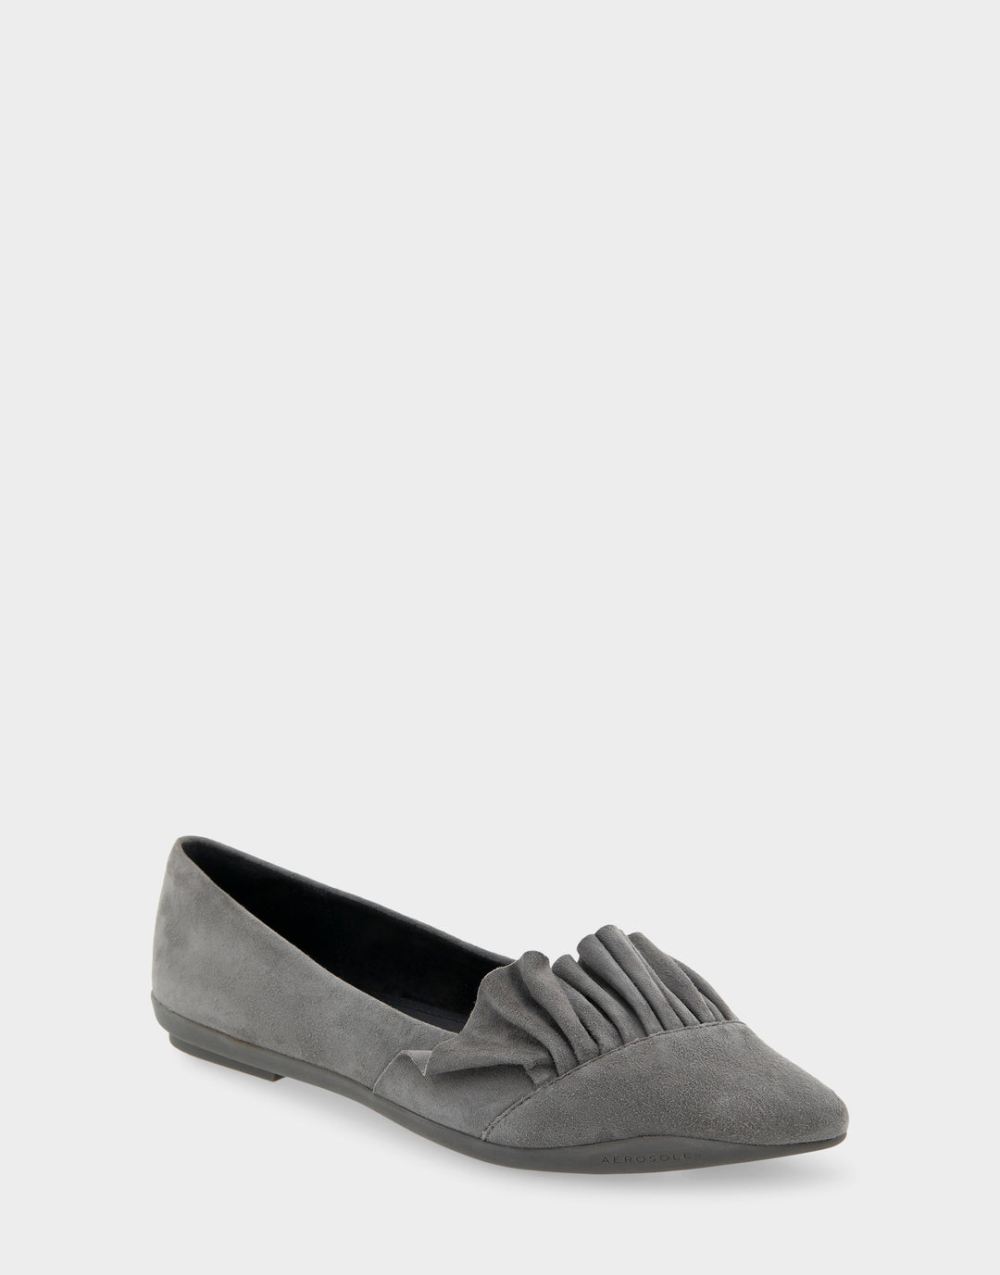 Women's | Dillion Quiet Shade Genuine Suede Ruffled Point Toe Flat